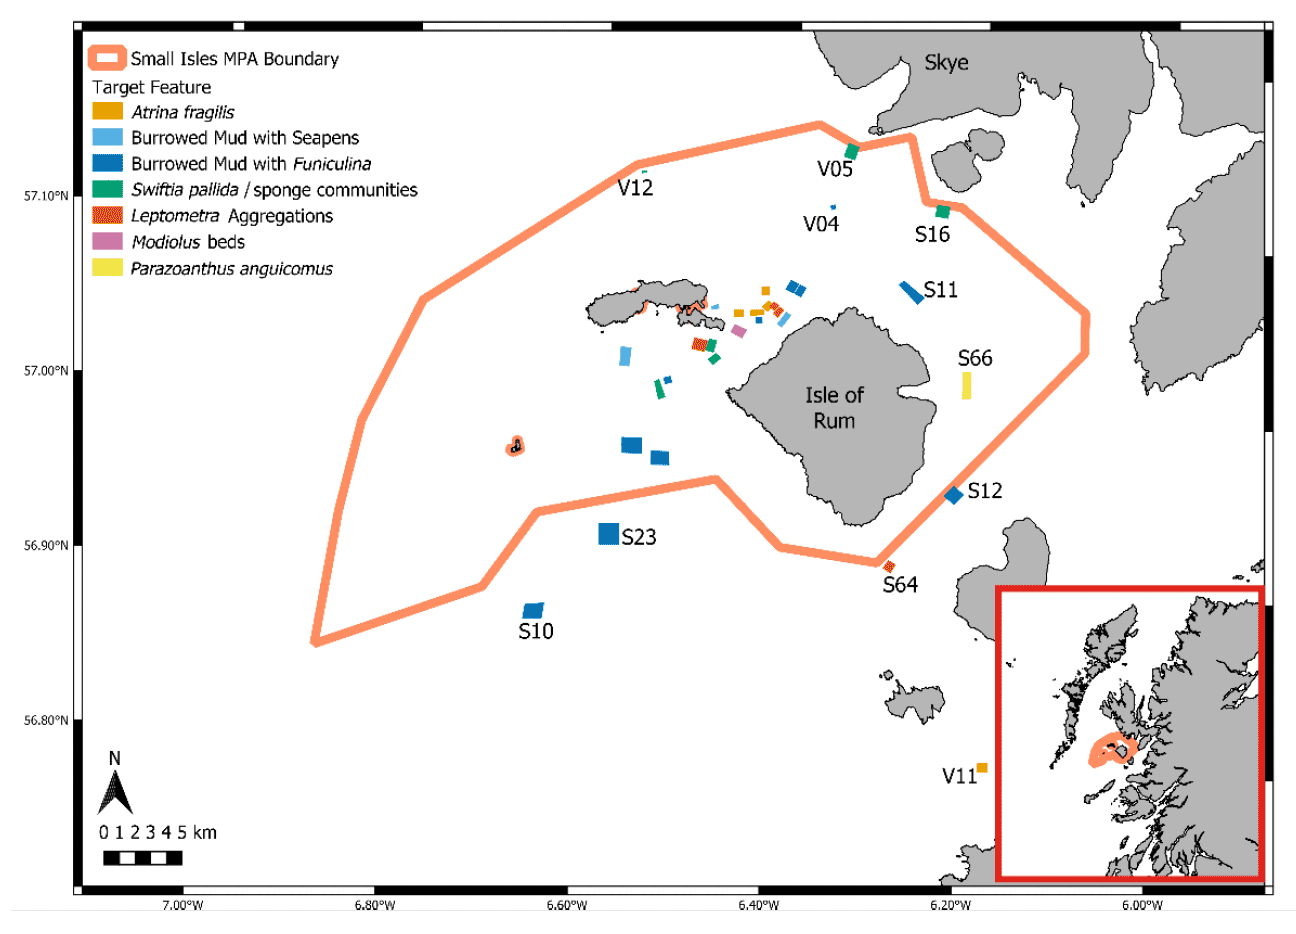 Most of the survey boxes for priority marine features are inside the Small Isles Marine Protected Area (MPA) boundary. Different biological features are targeted by different survey boxes.